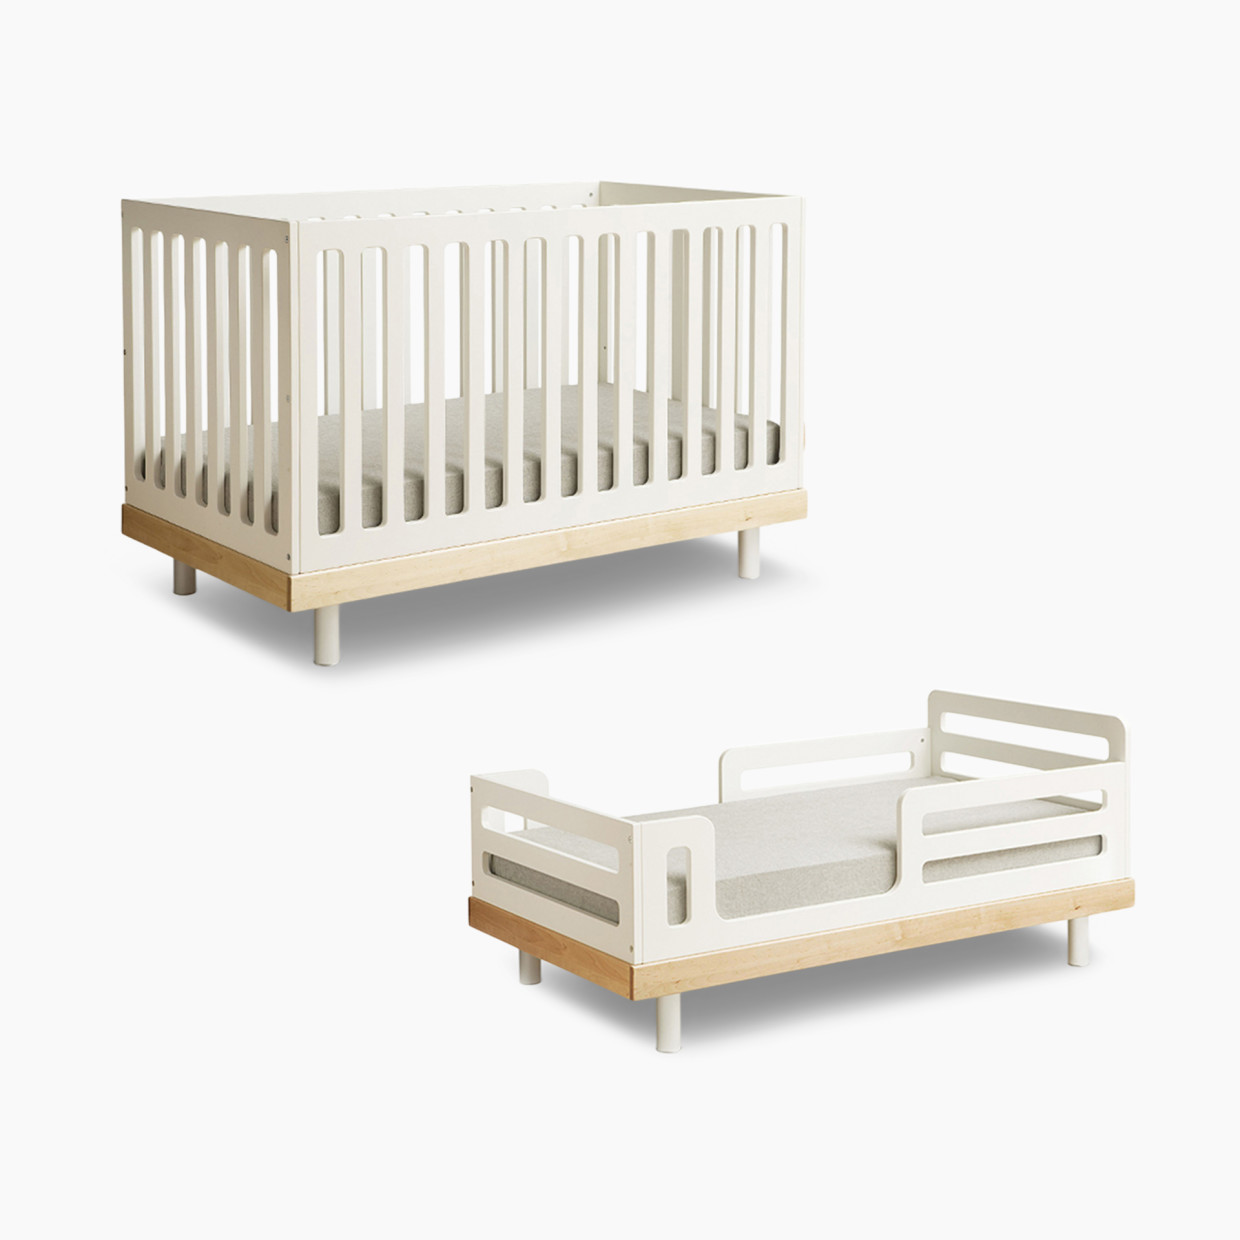 Oeuf Classic Toddler Bed Conversion Kit - White.